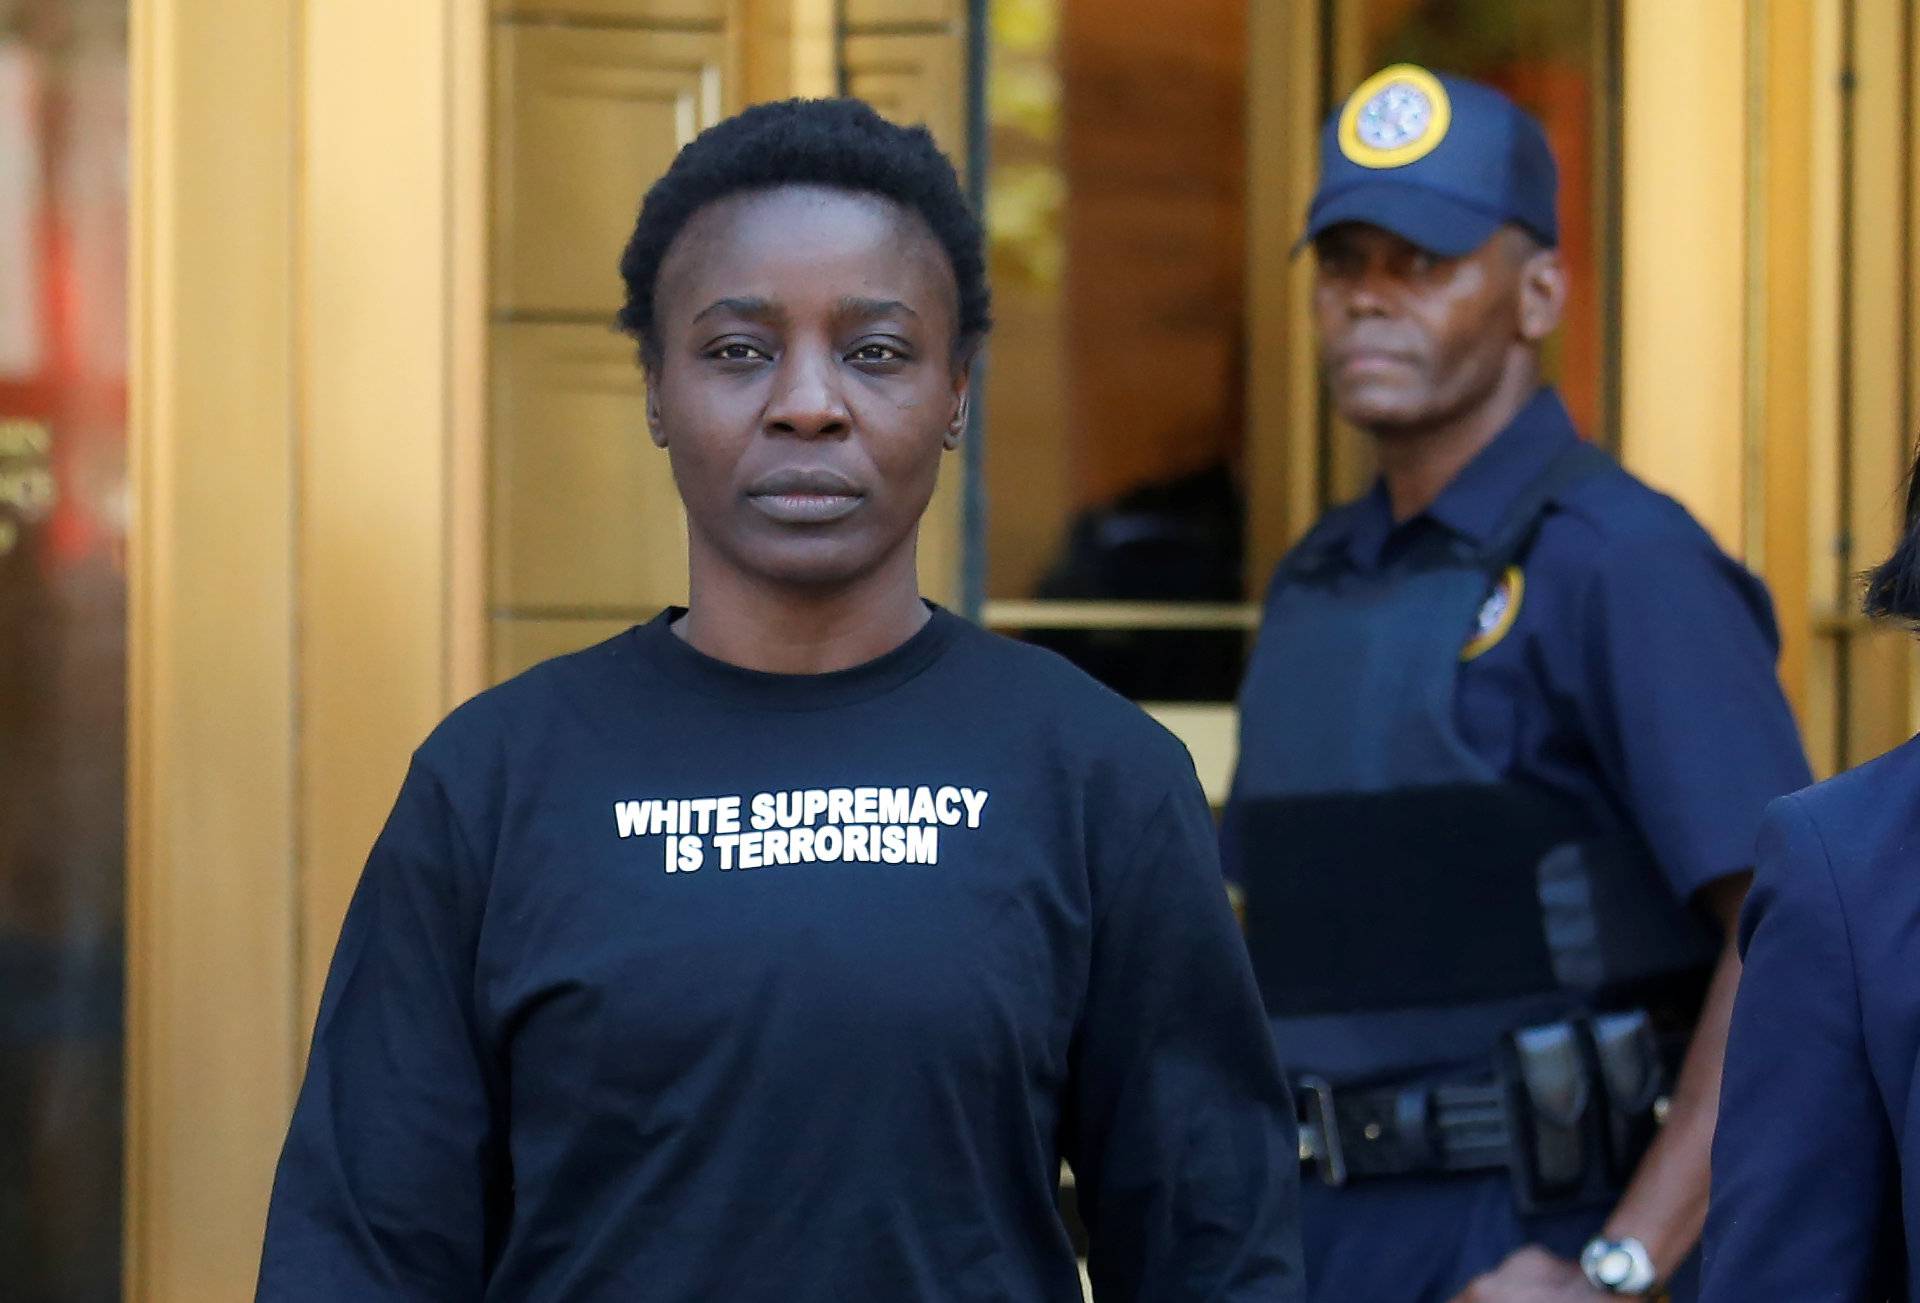 Patricia Okoumou walks out of federal court from her arraignment, a day after authorities say she scaled the stone pedestal of the Statue of Liberty to protest U.S. immigration policy, in Manhattan, New York